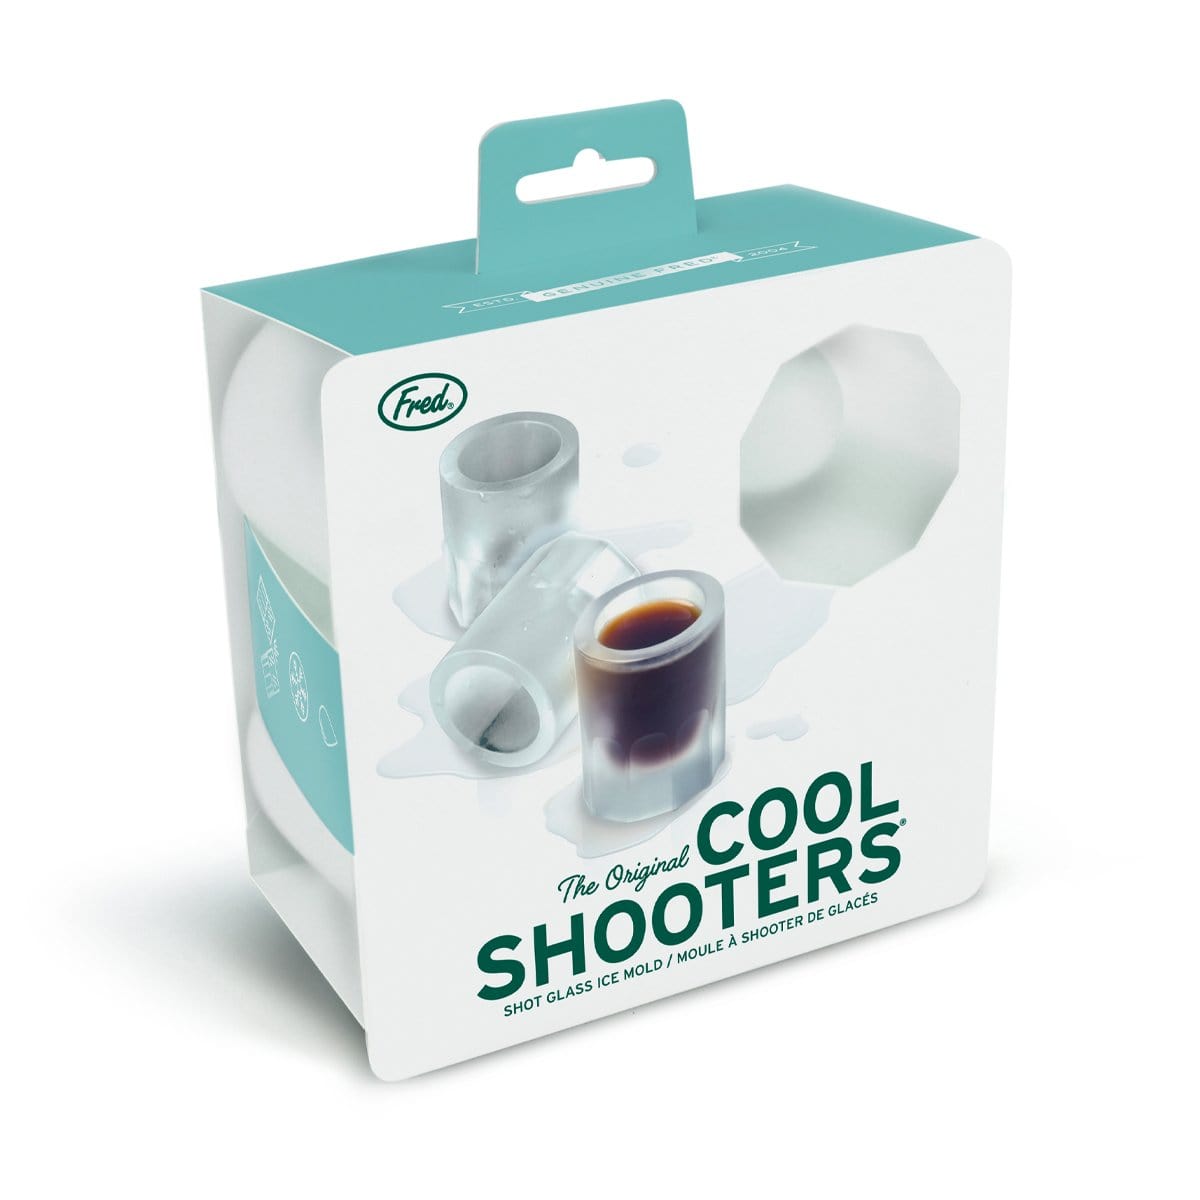 FRED Cool Shooters Silicone Shot Glass Mold New Freeze